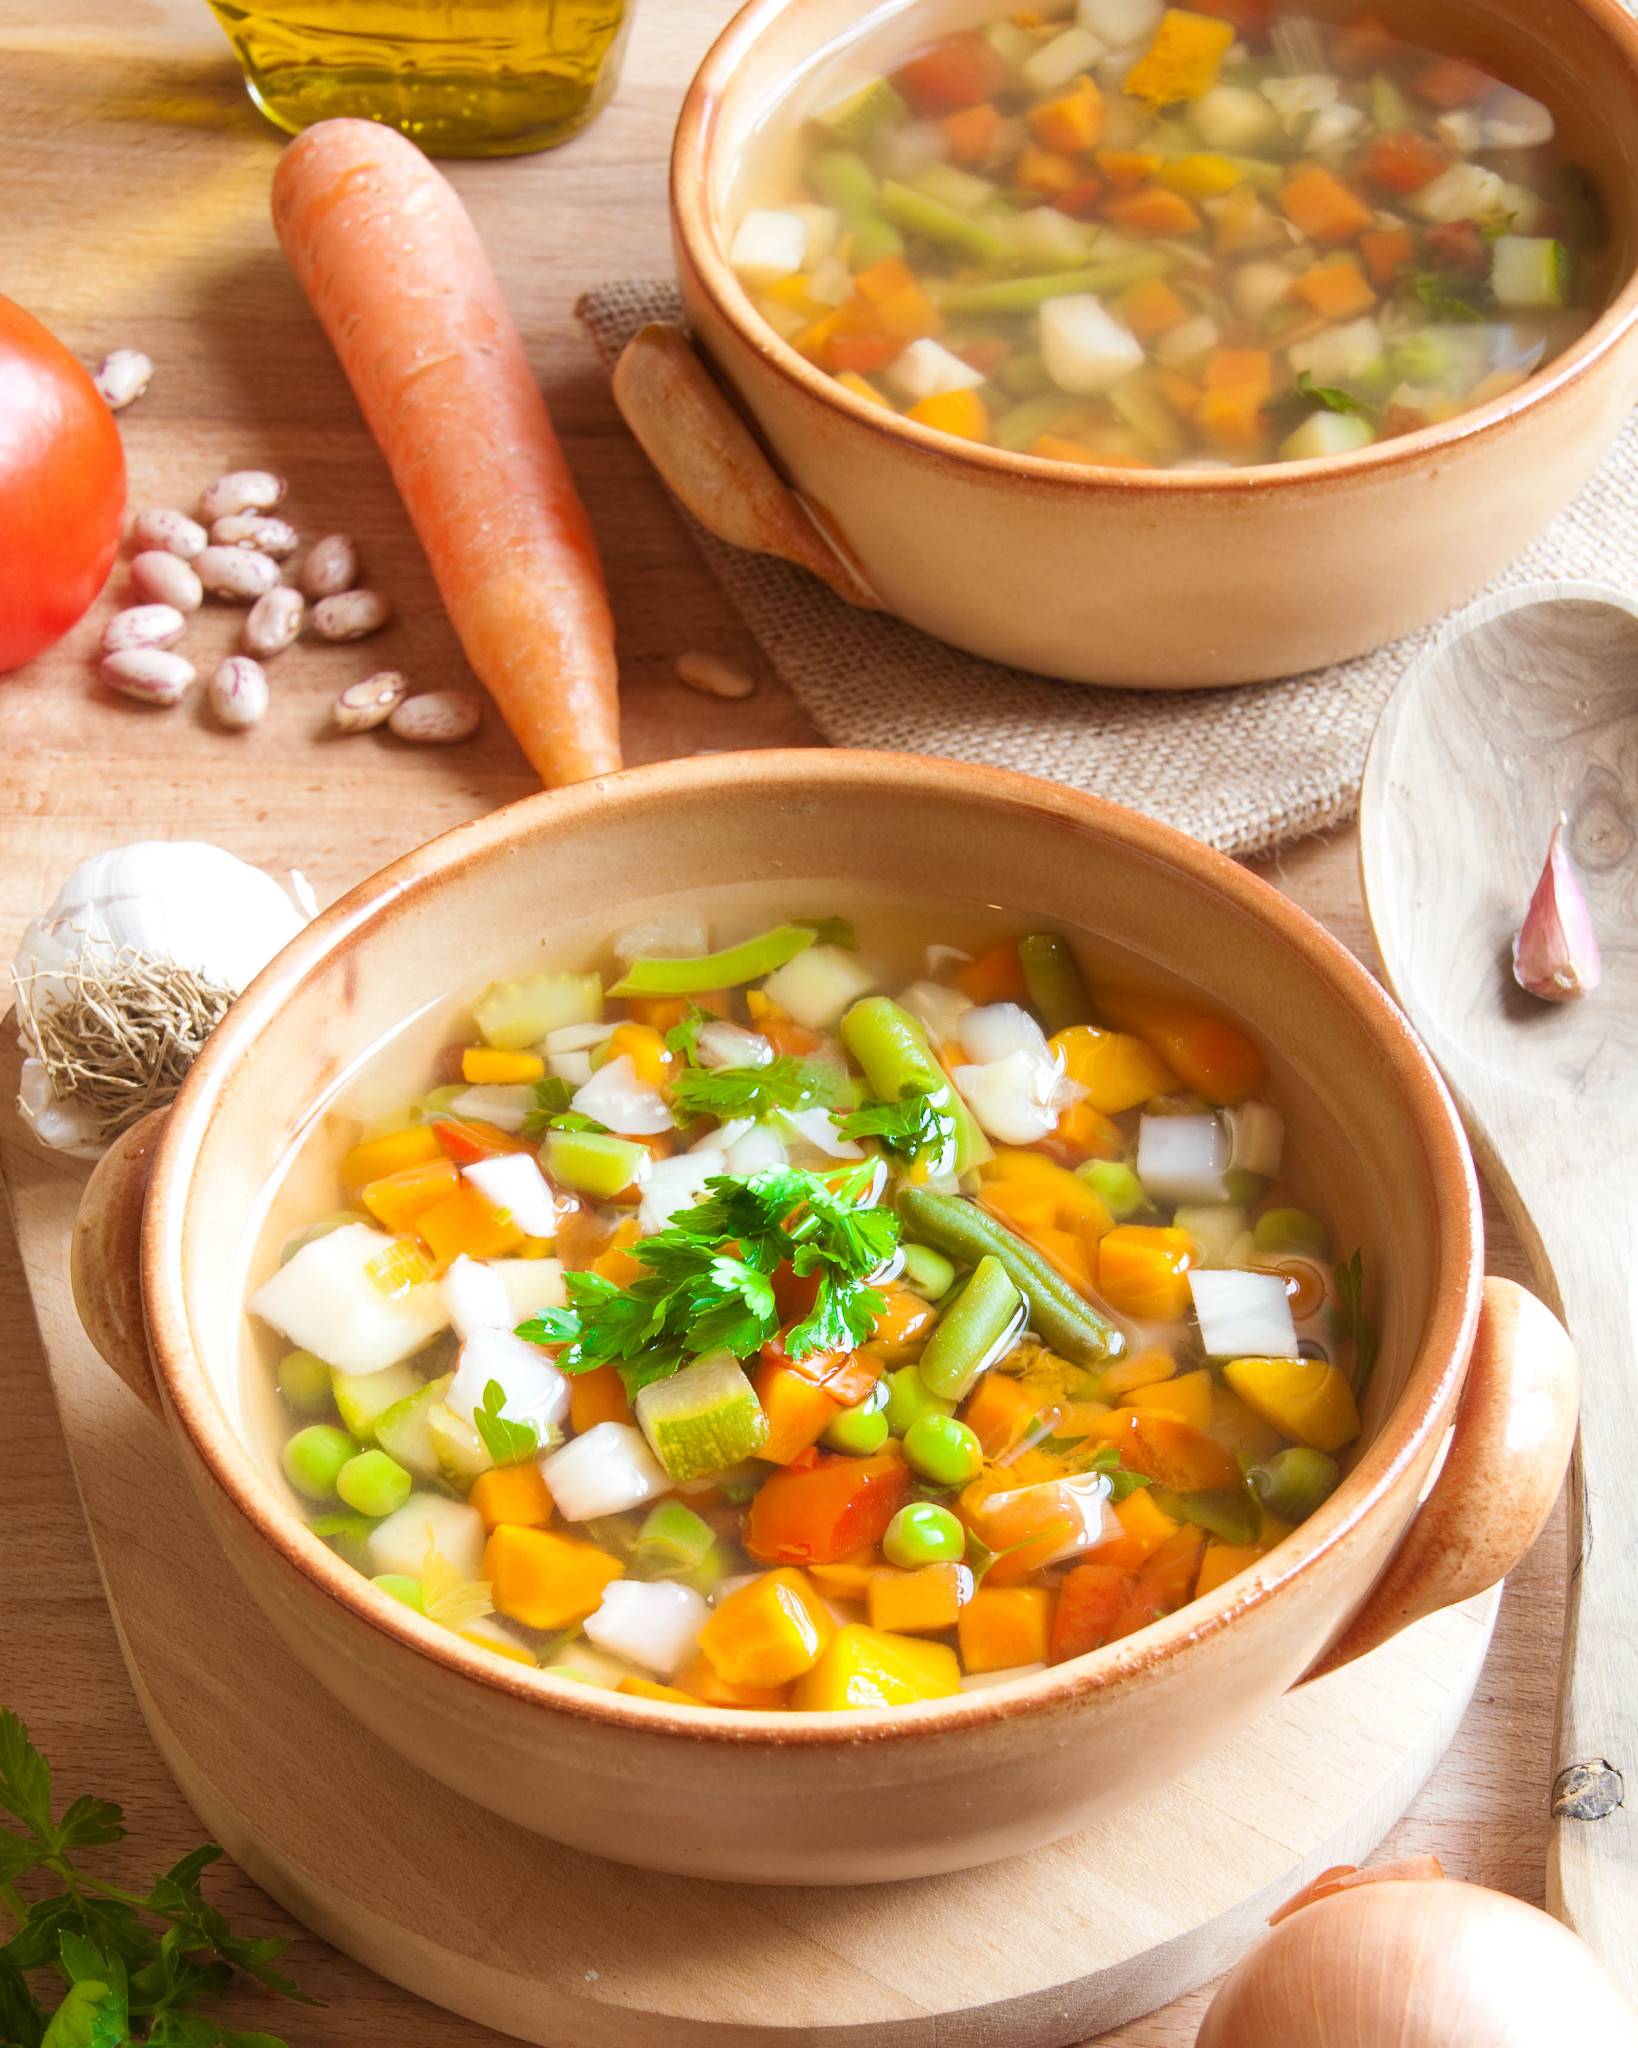 Balsam Provisions food delivery vegetable soup